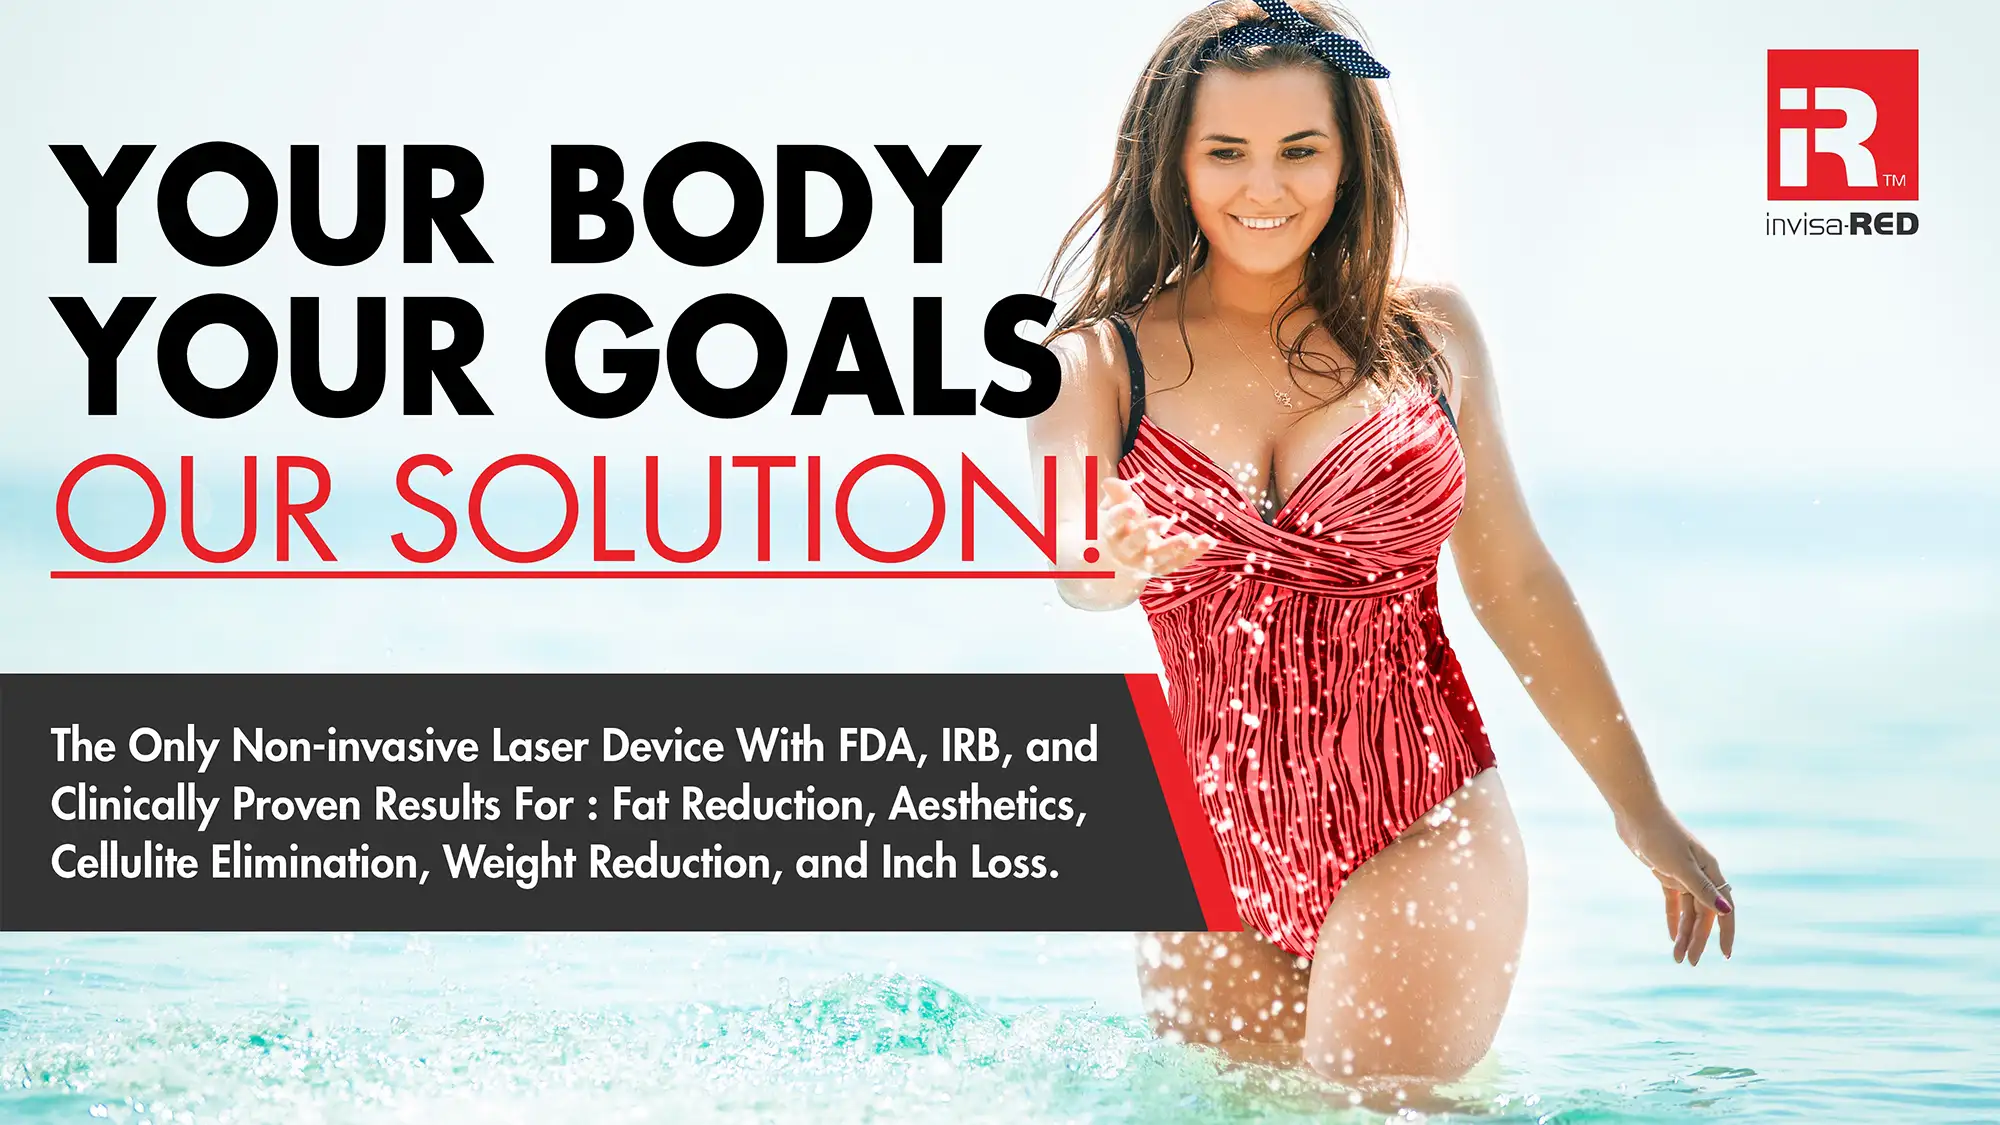 Weight Loss Lockport IL invisa-RED Your Body Your Goals